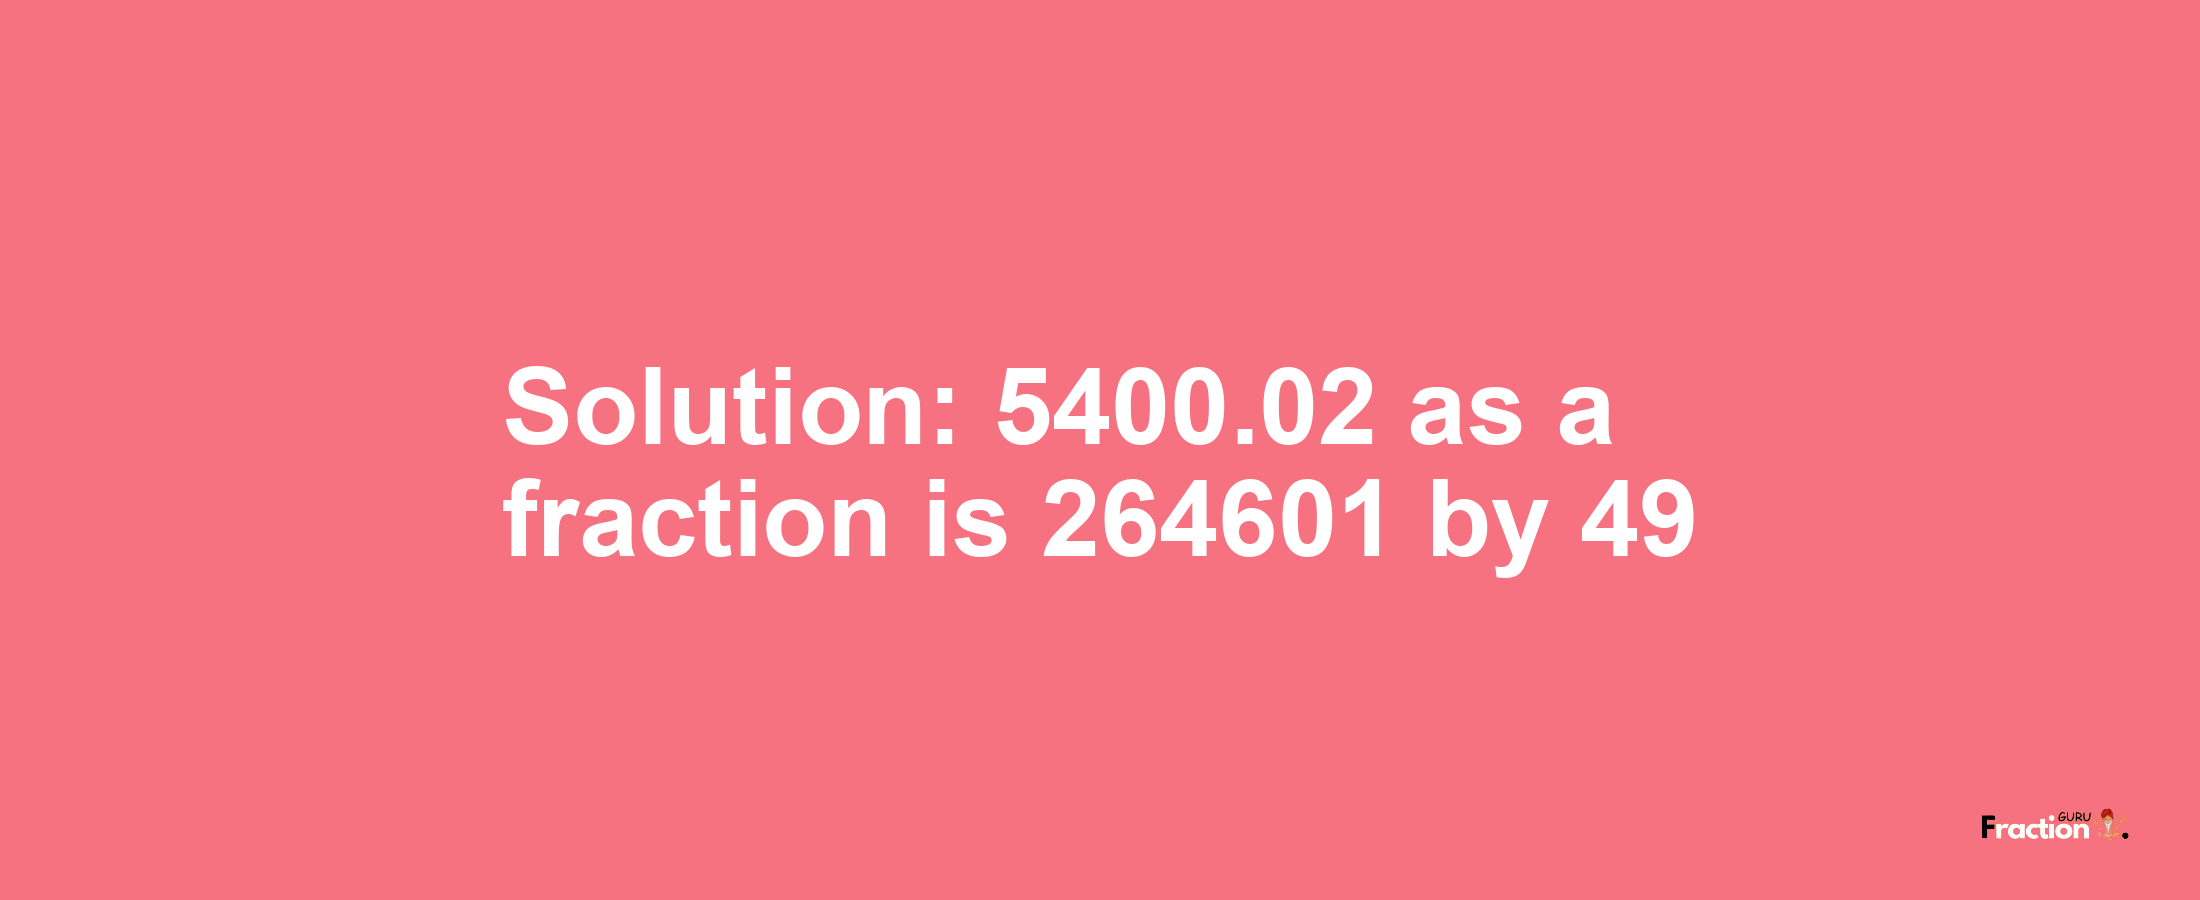 Solution:5400.02 as a fraction is 264601/49